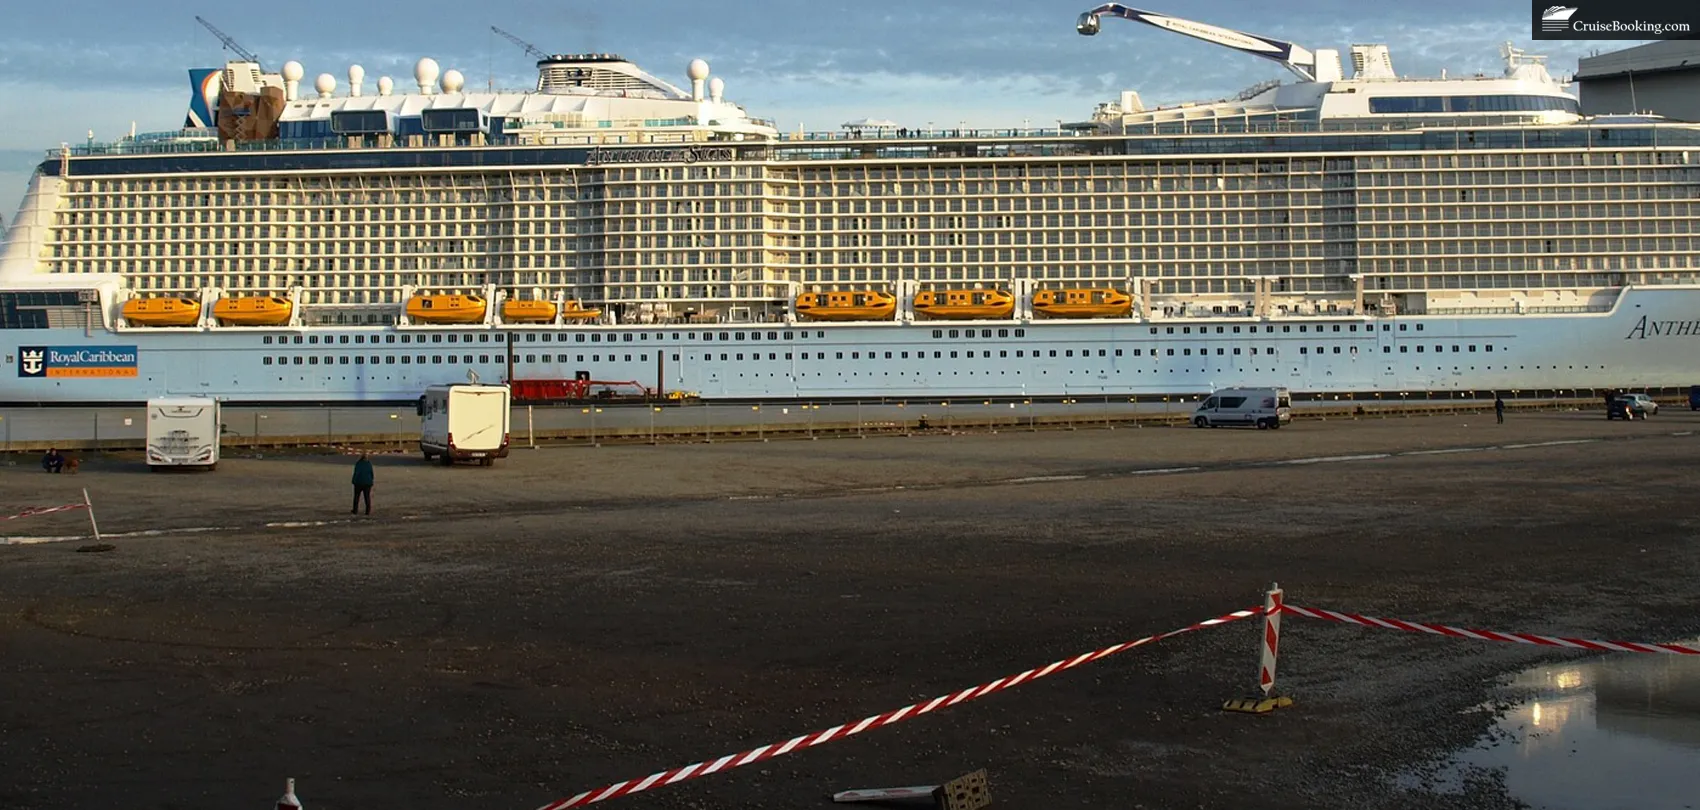 Royal Caribbean’s Anthem of the Seas to Sail from Singapore